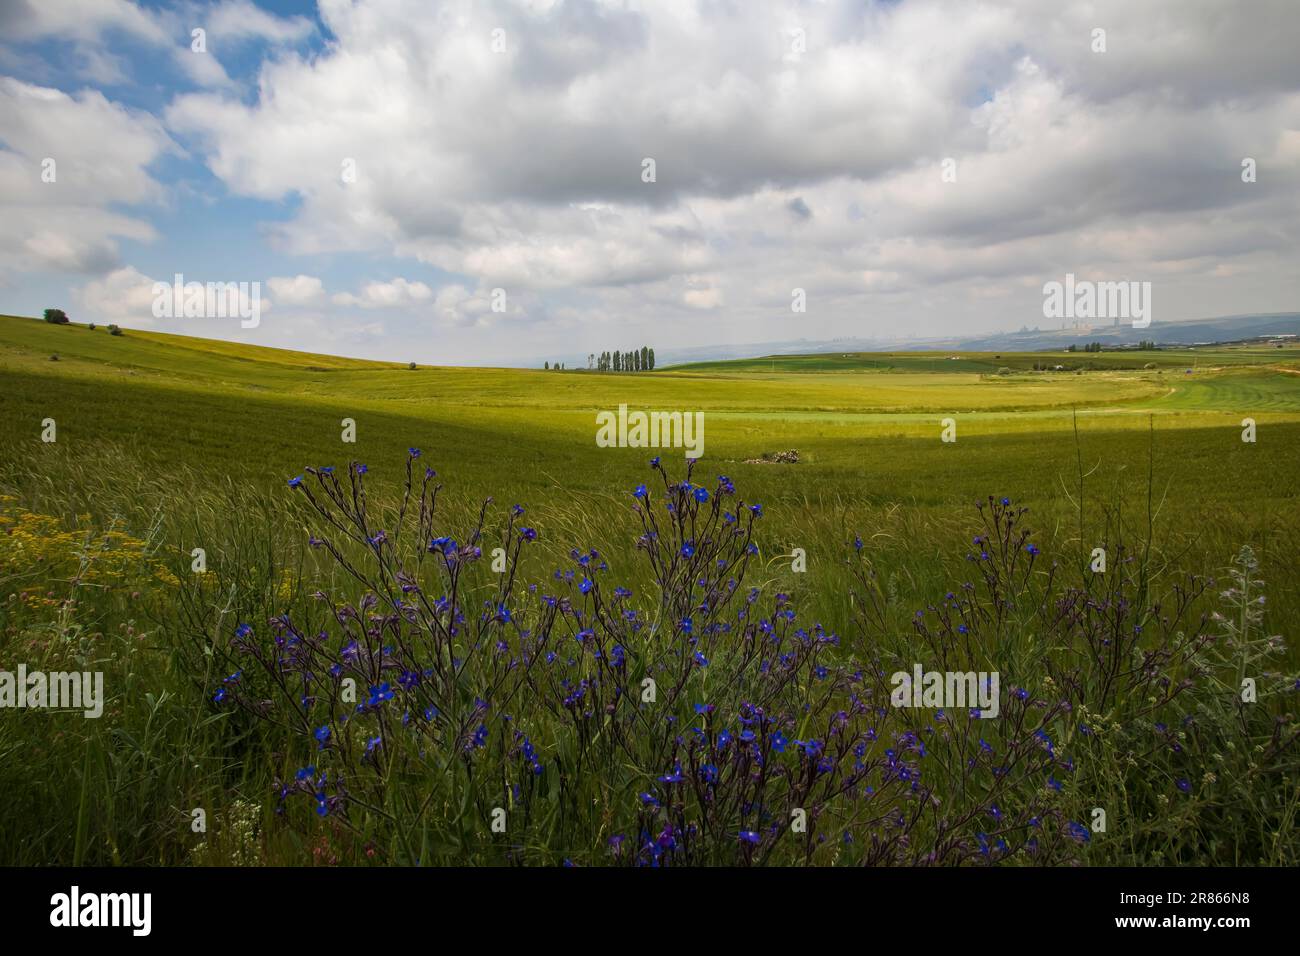 A beautiful wide-angle landscape in good light. Stock Photo